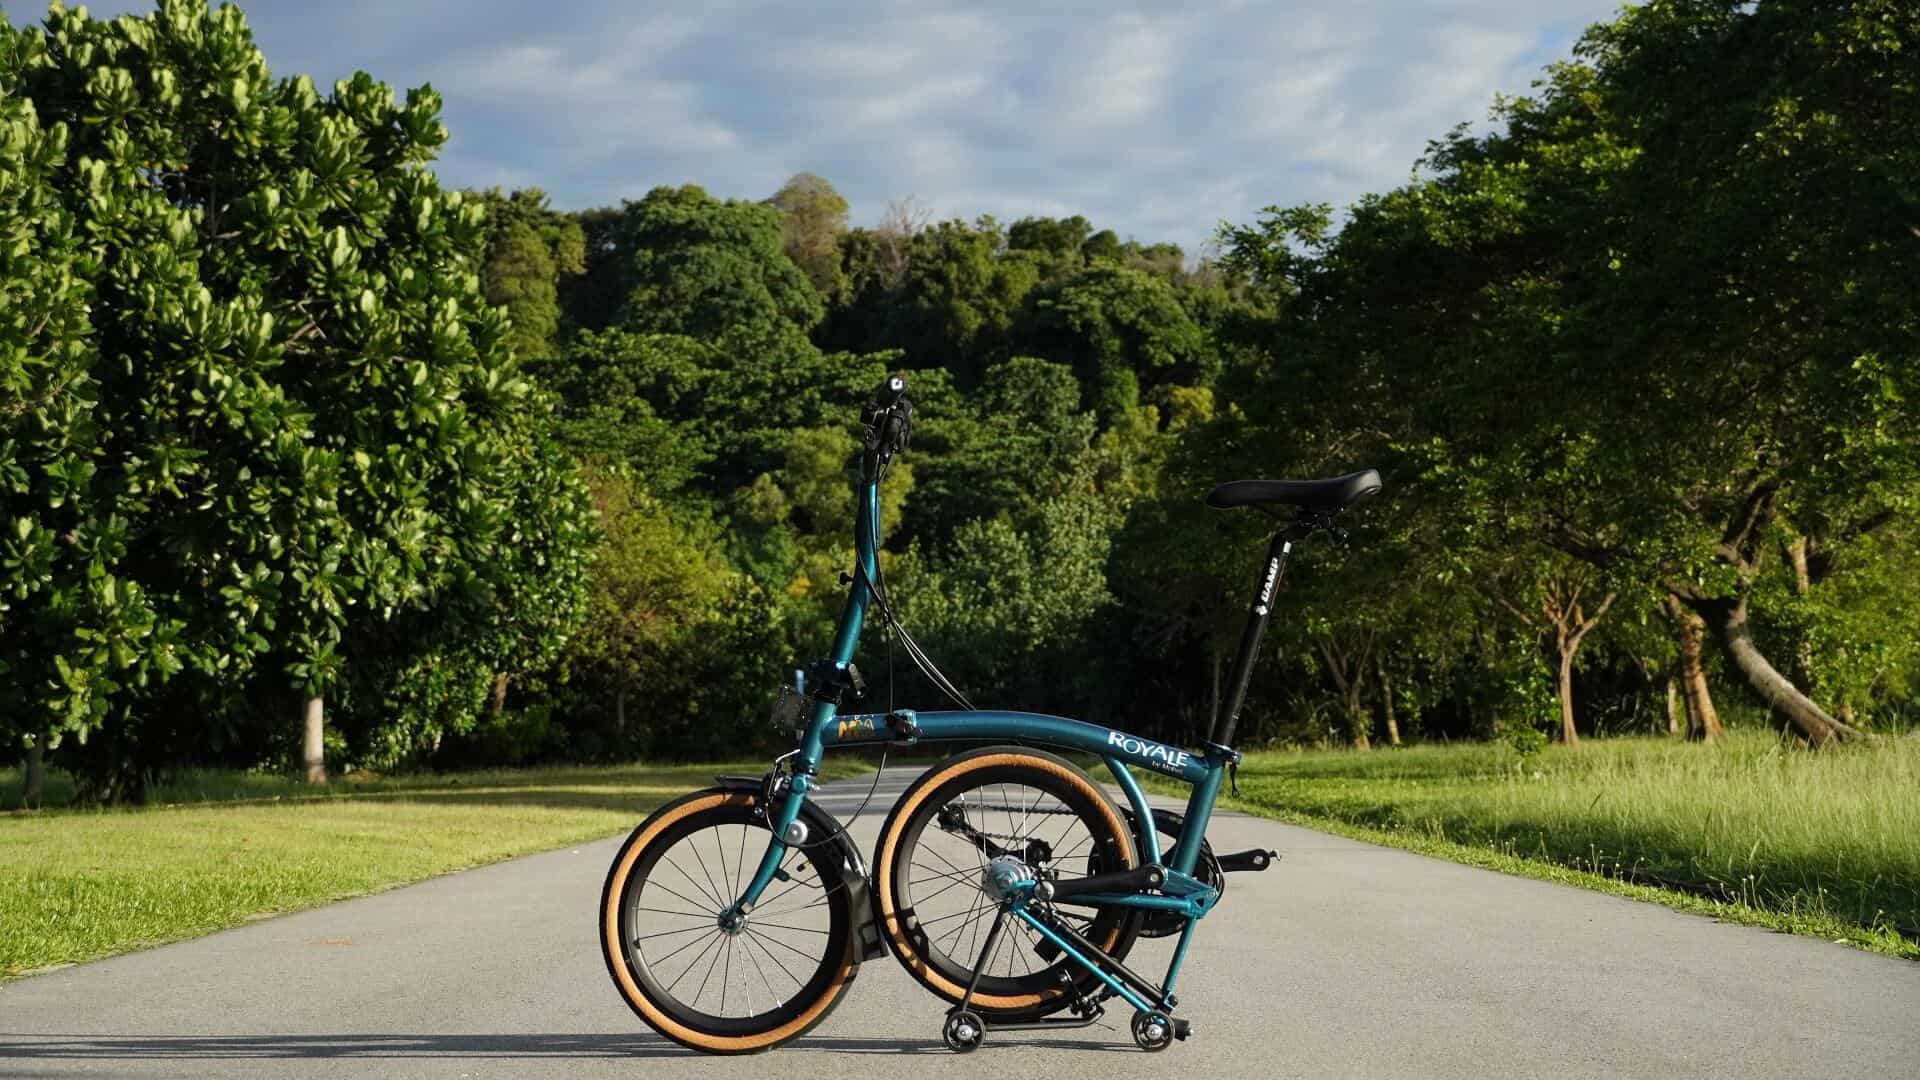 MOBOT ROYALE OCEAN GREEN foldable bicycle at Lazarus Island 1 - ROYALE by MOBOT Foldable Trifold Bicycle 2022 Lineup